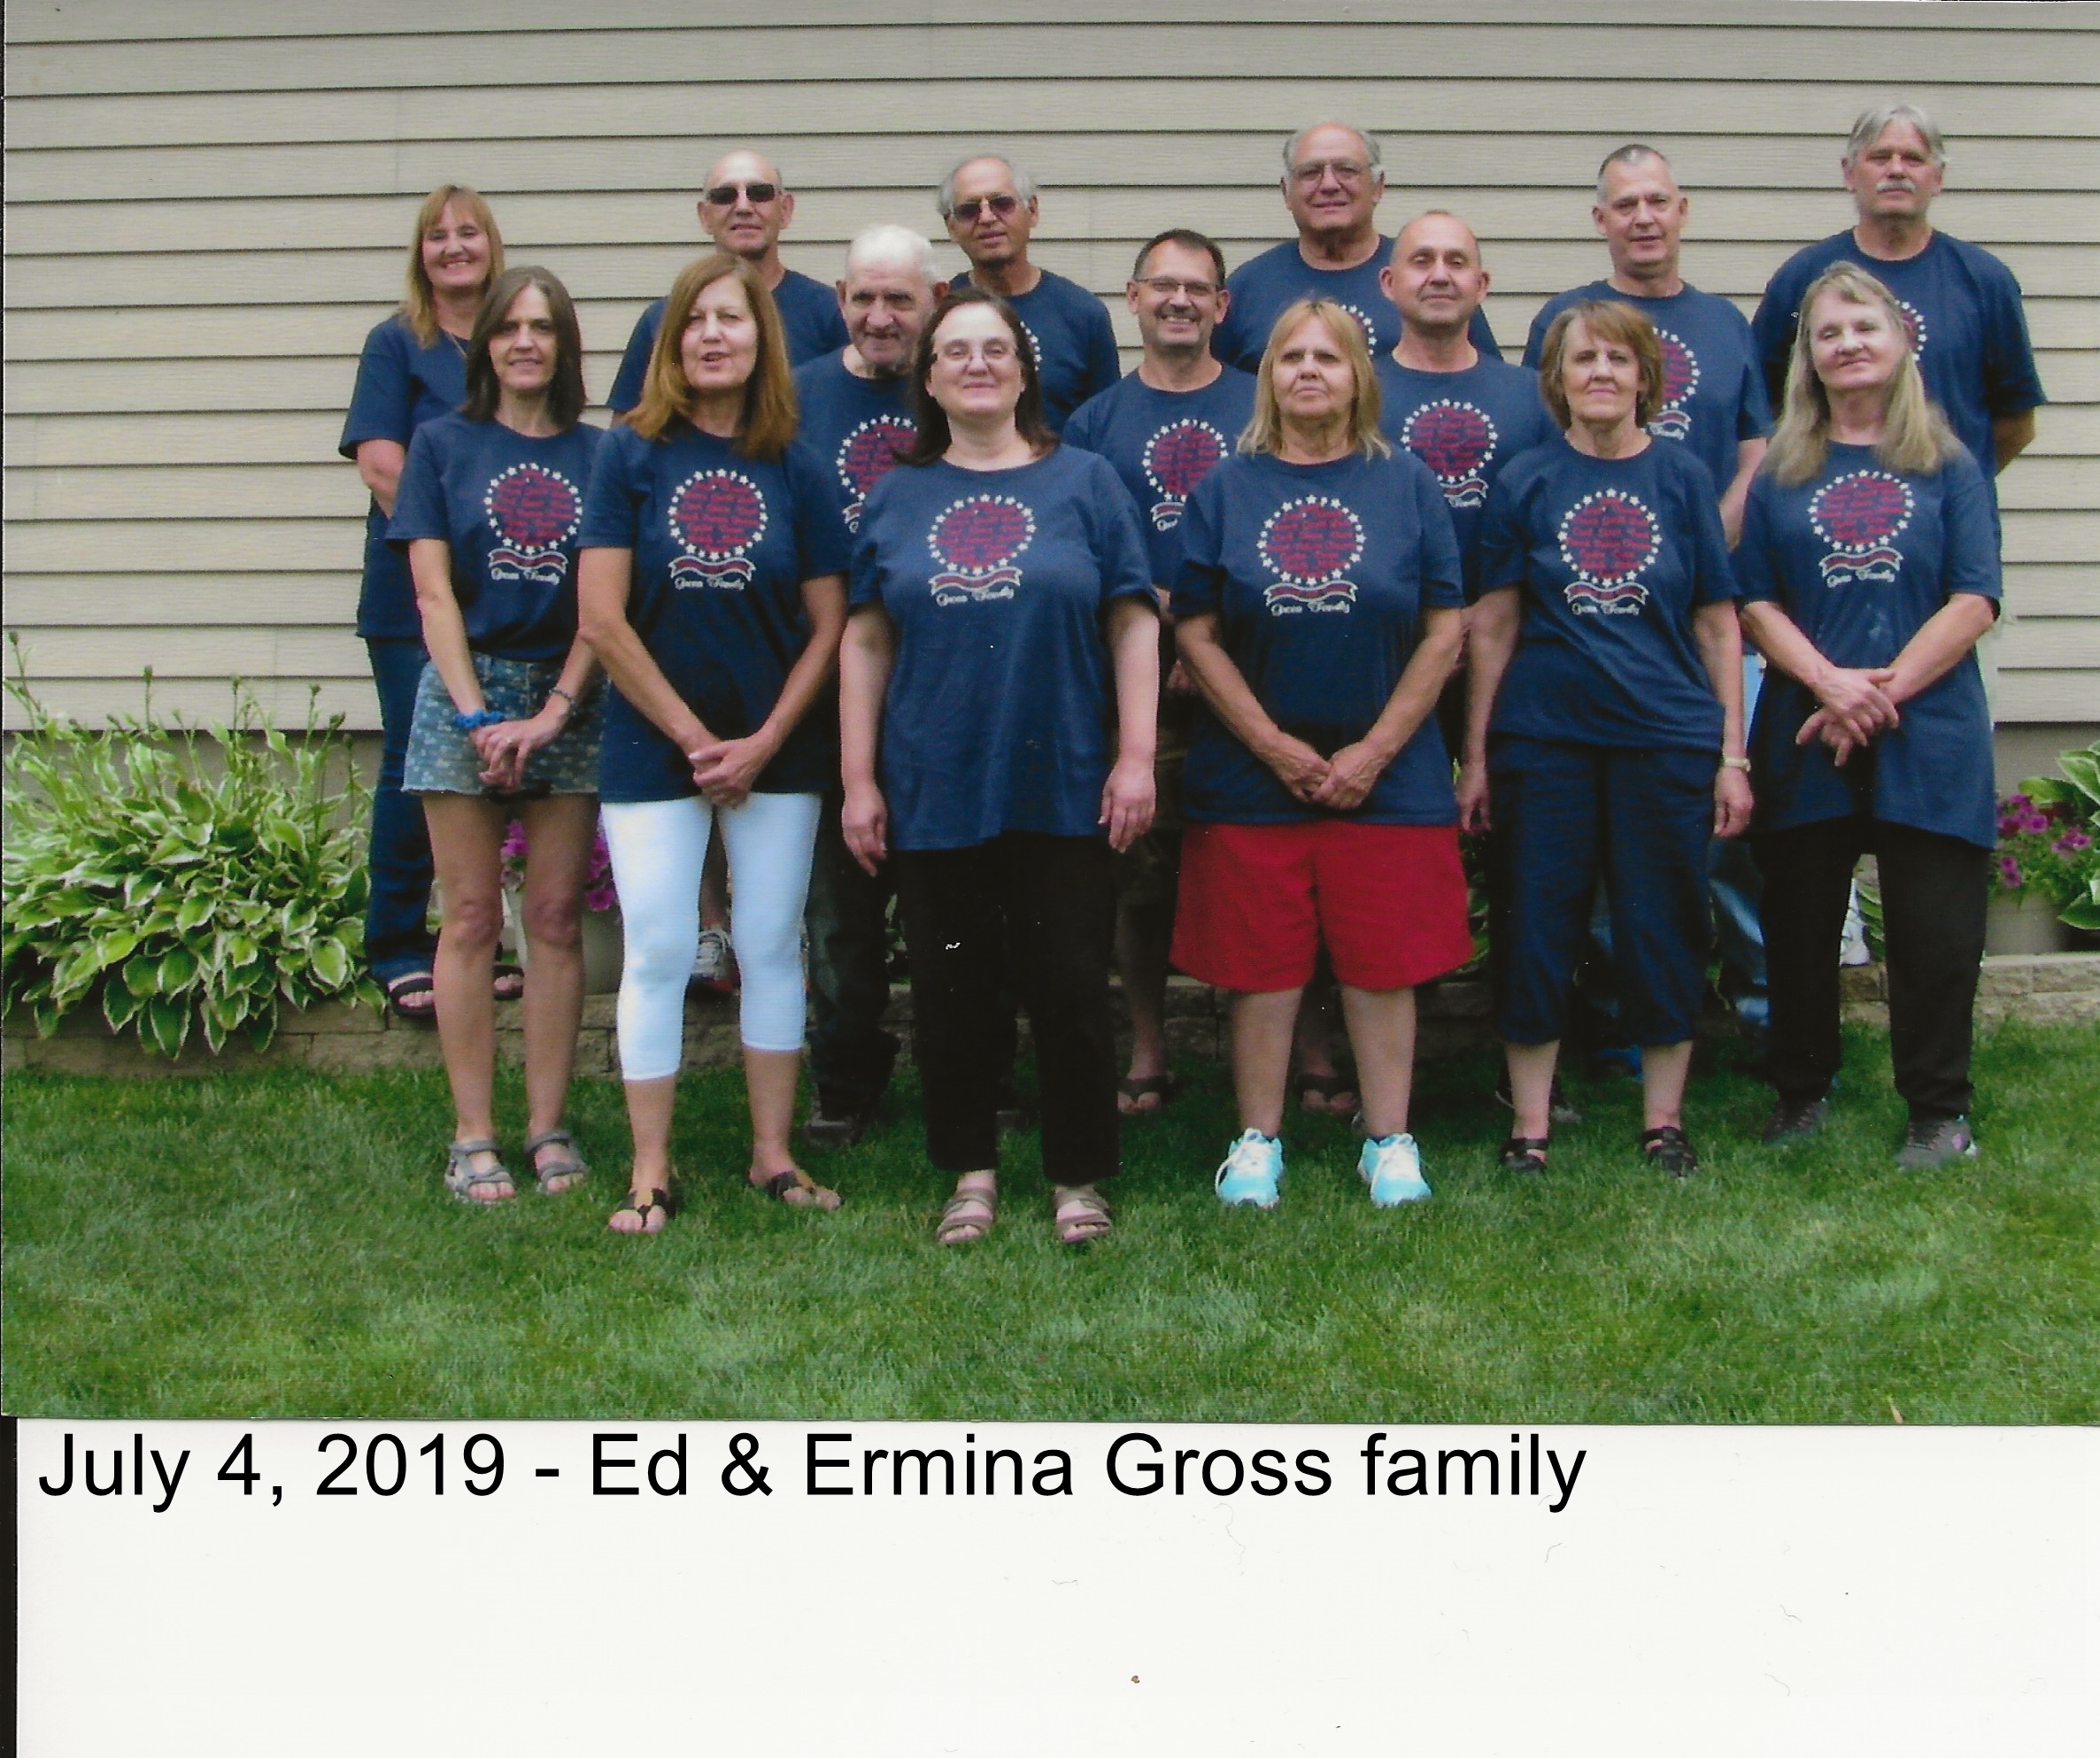 July 2019 Edmund and Ermina Gross family.